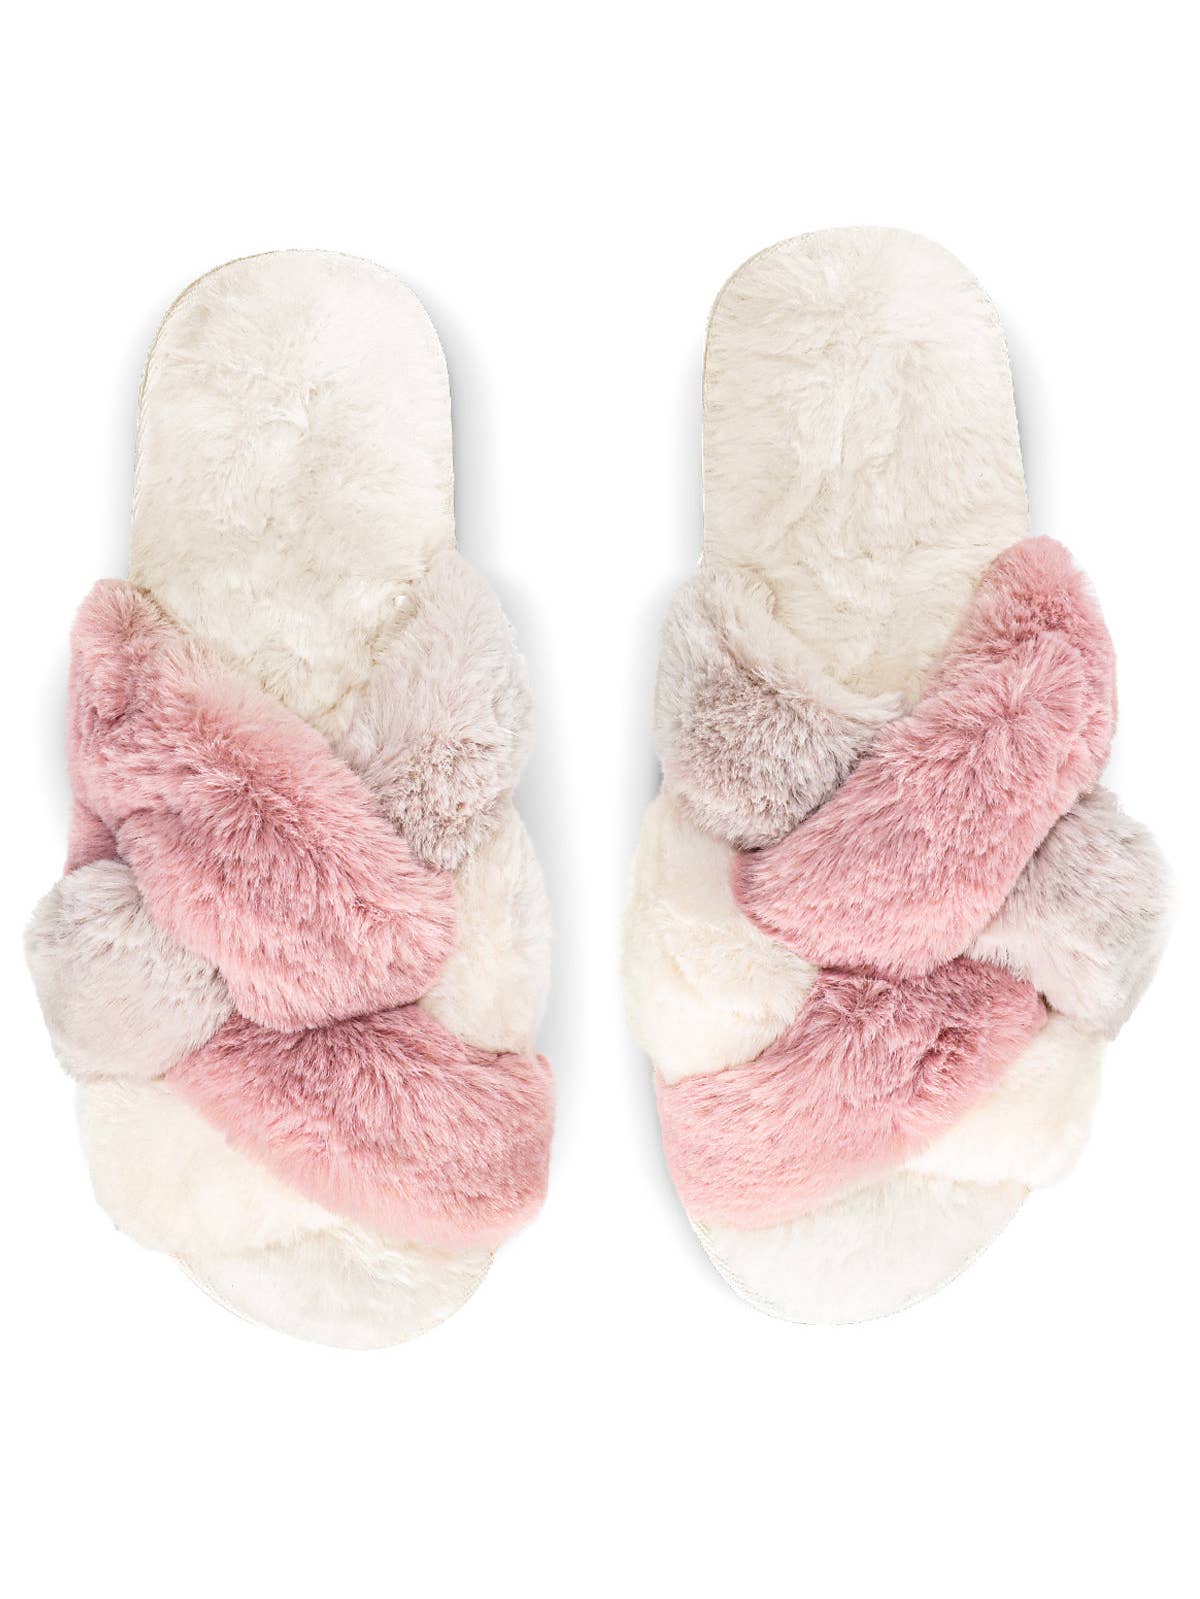 Multi Weave Plush Slippers in Ivory